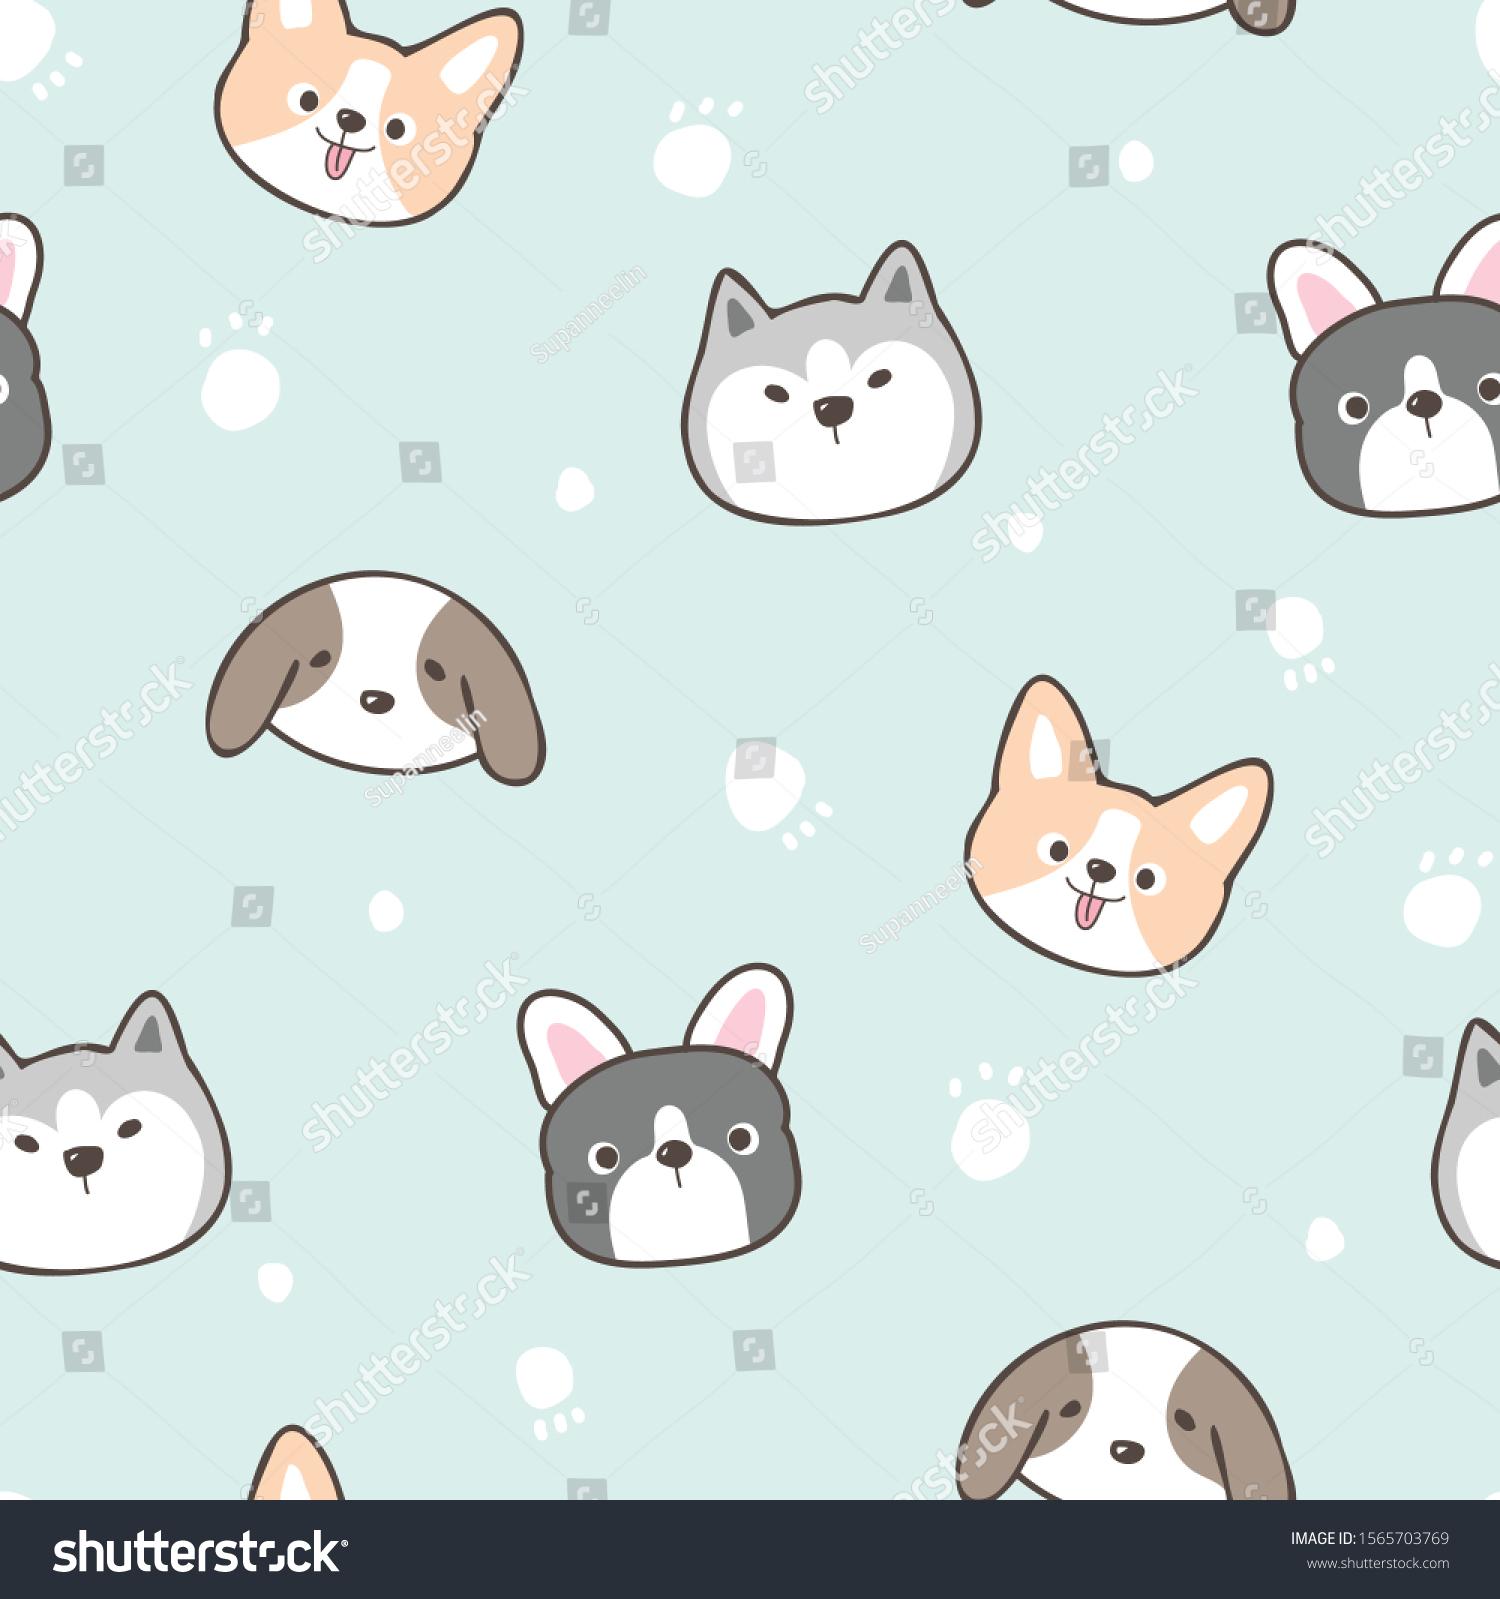 Free download Seamless Pattern Cute Cartoon Dog Face Stock Vector ...